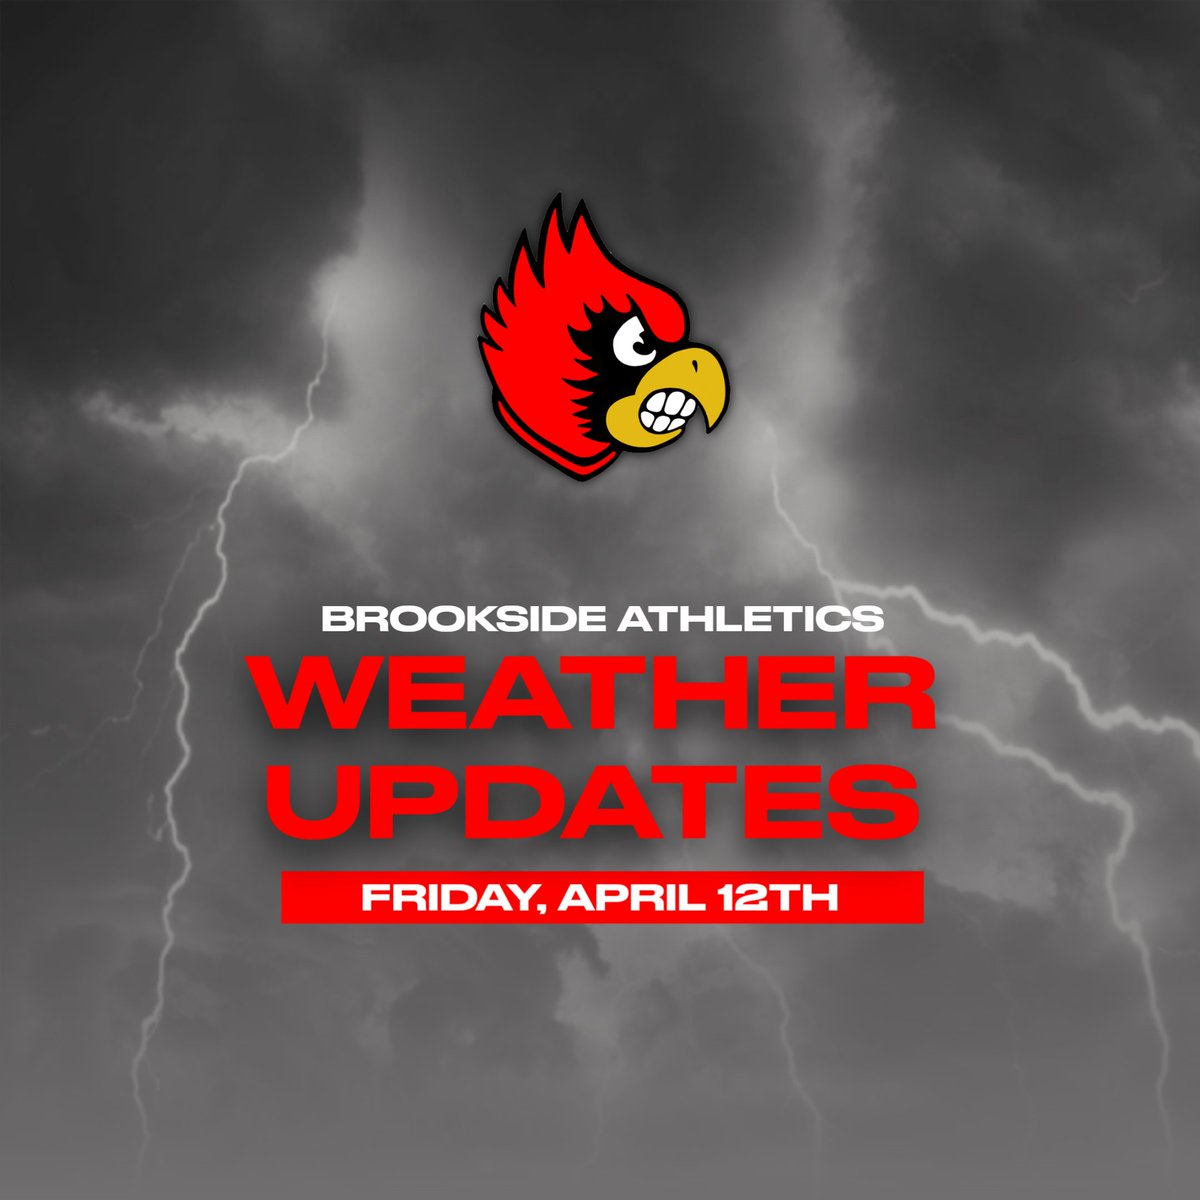 Updates for today's BHS & BMS athletic events: brooksidecardinals.com/news/91632